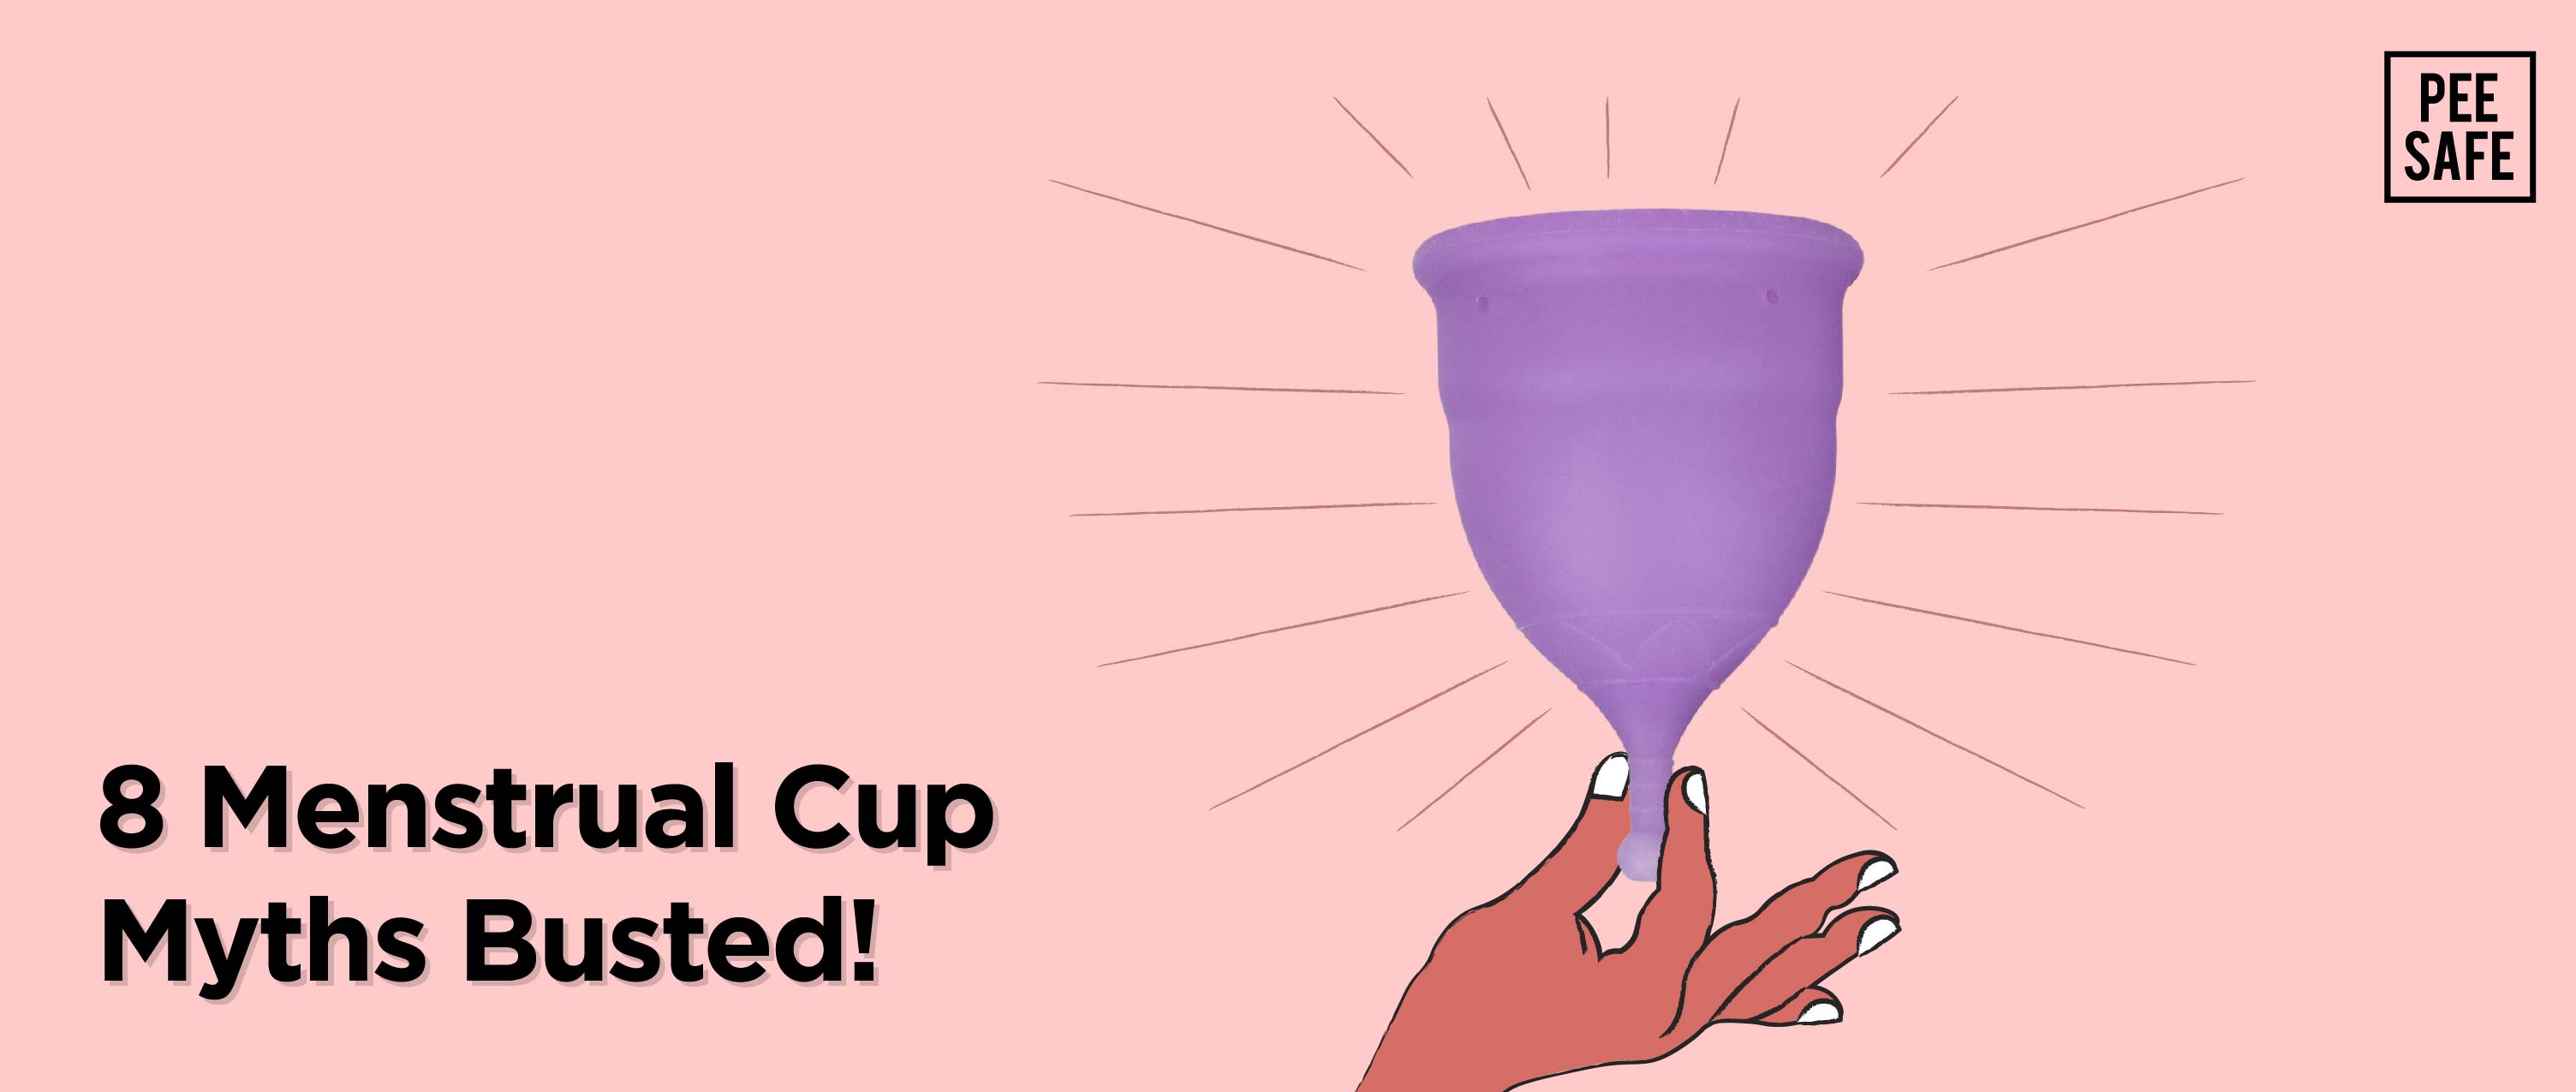 8 Menstrual Cup Myths Busted!